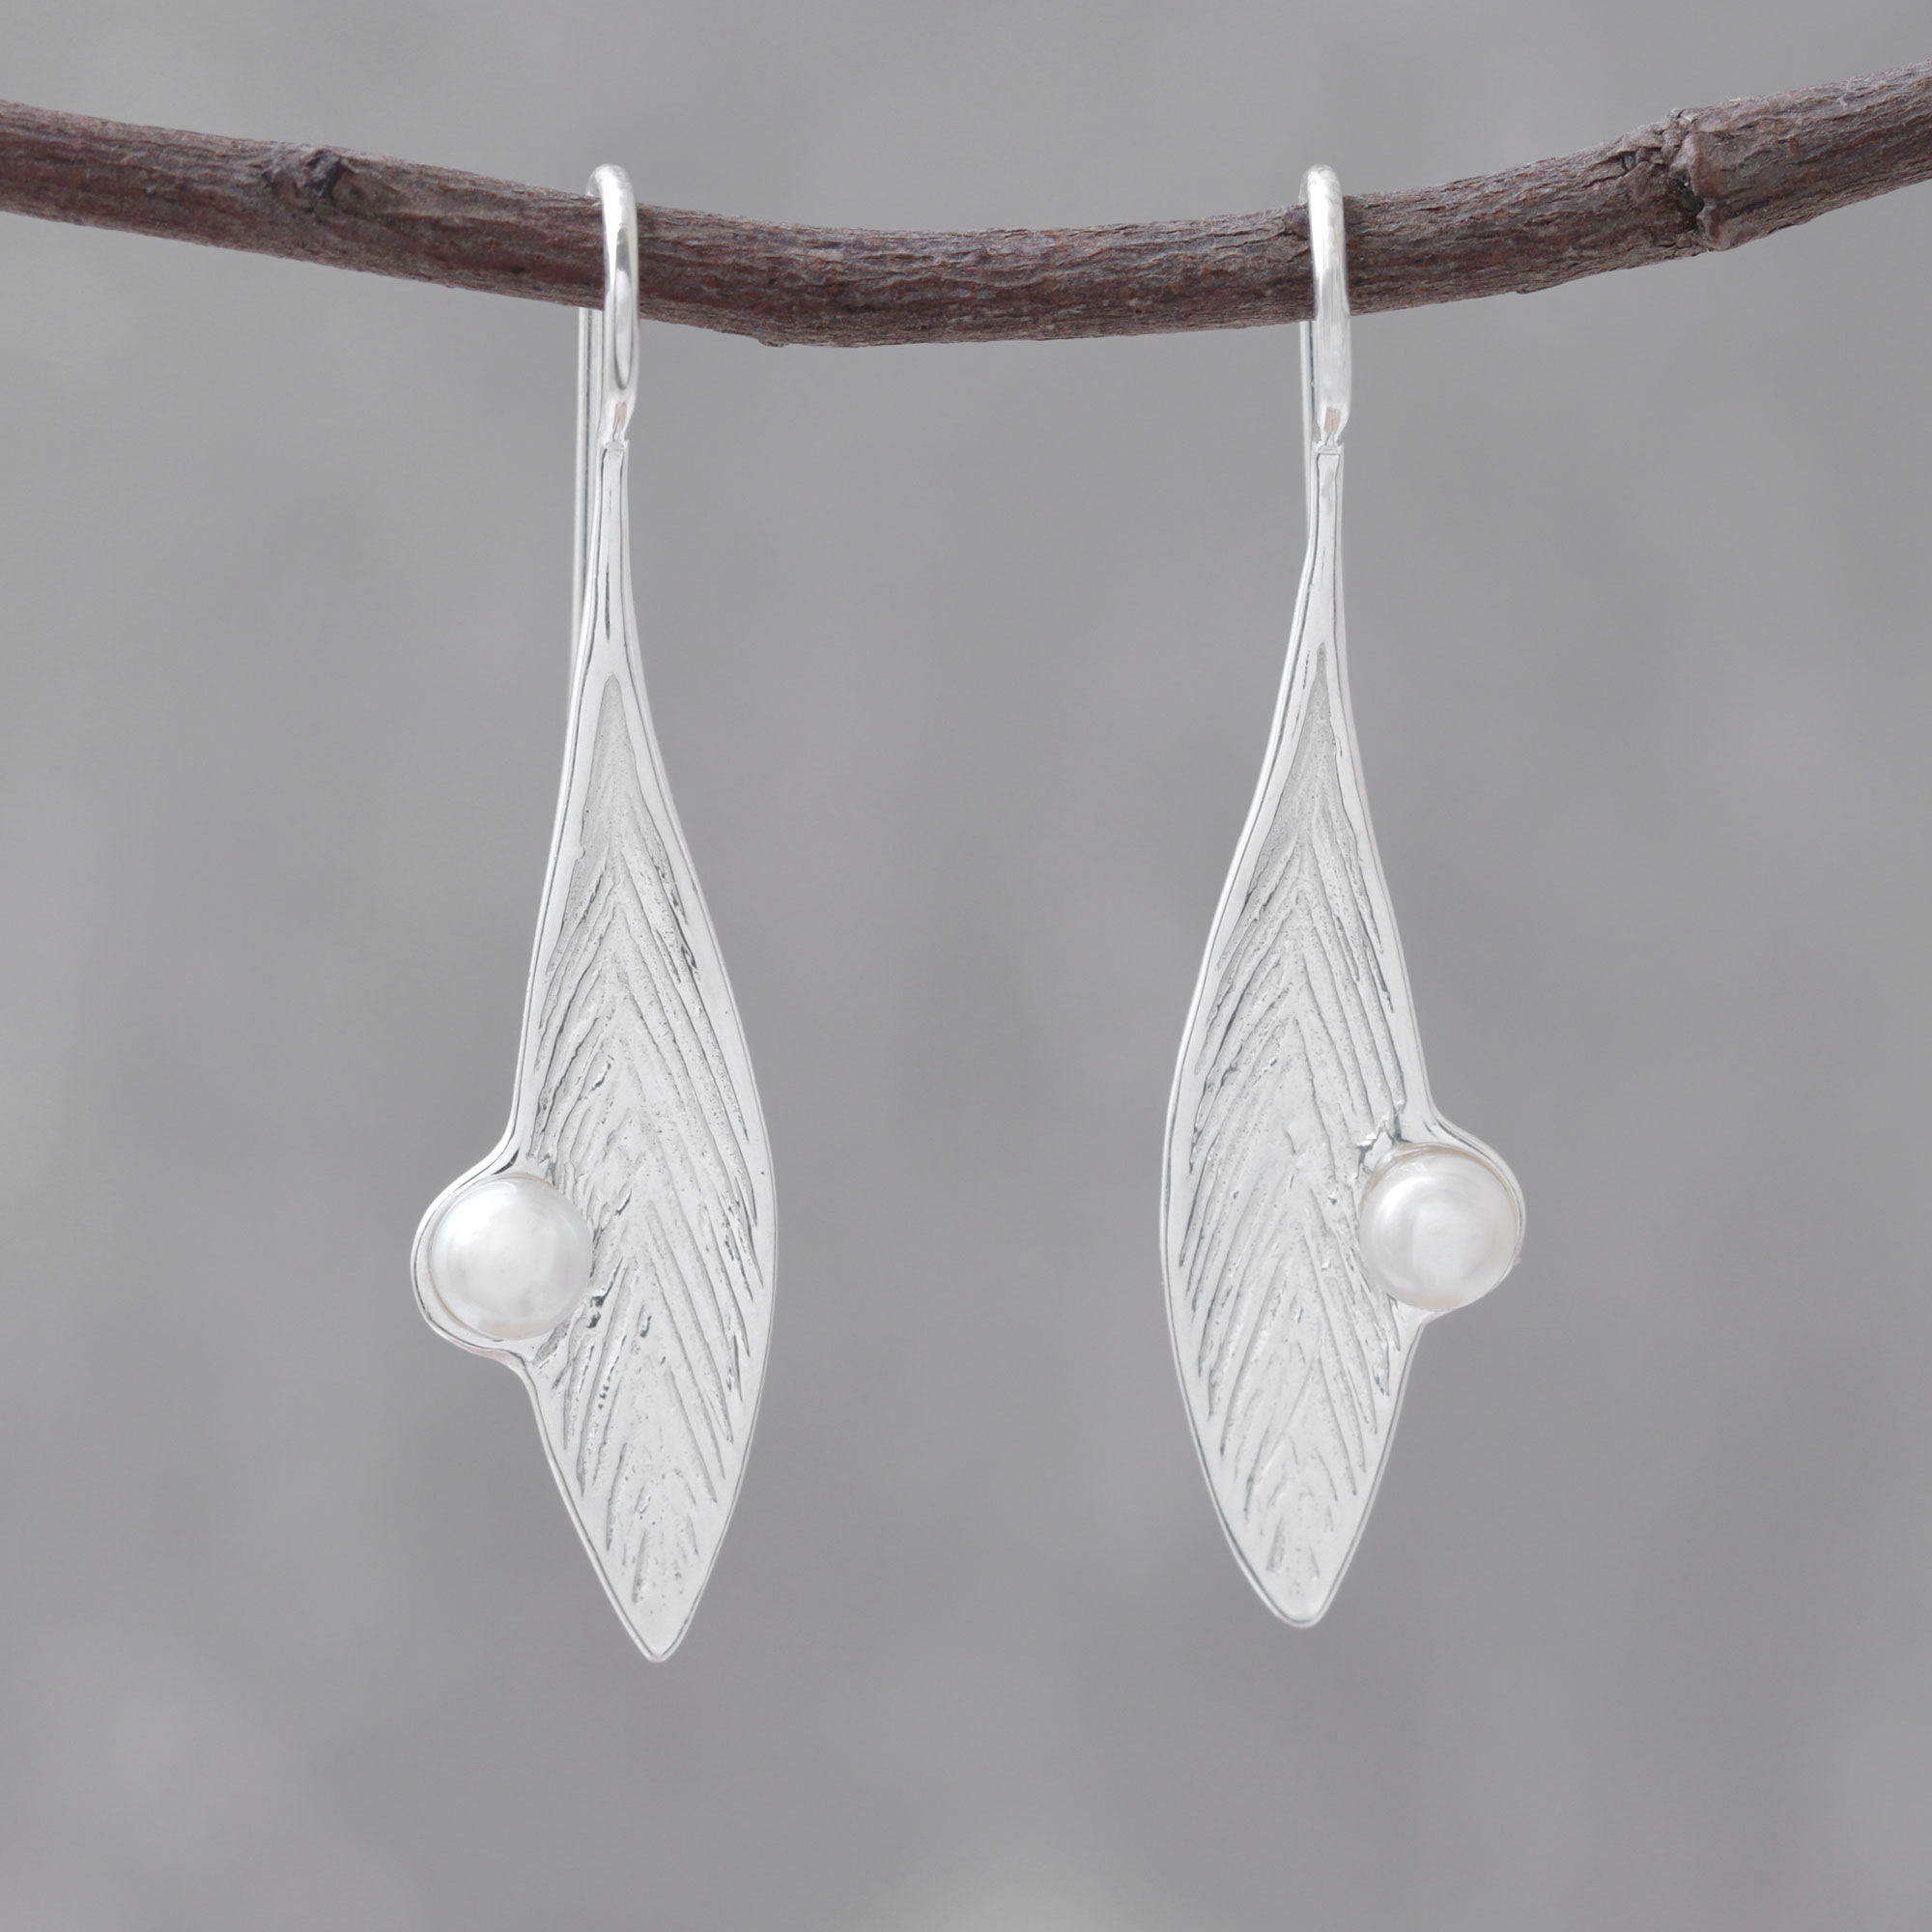 Silver leaf and pearl dangly earrings handmade sterling silver textured leaves with a pink fresh water cultured pearl on hook wires